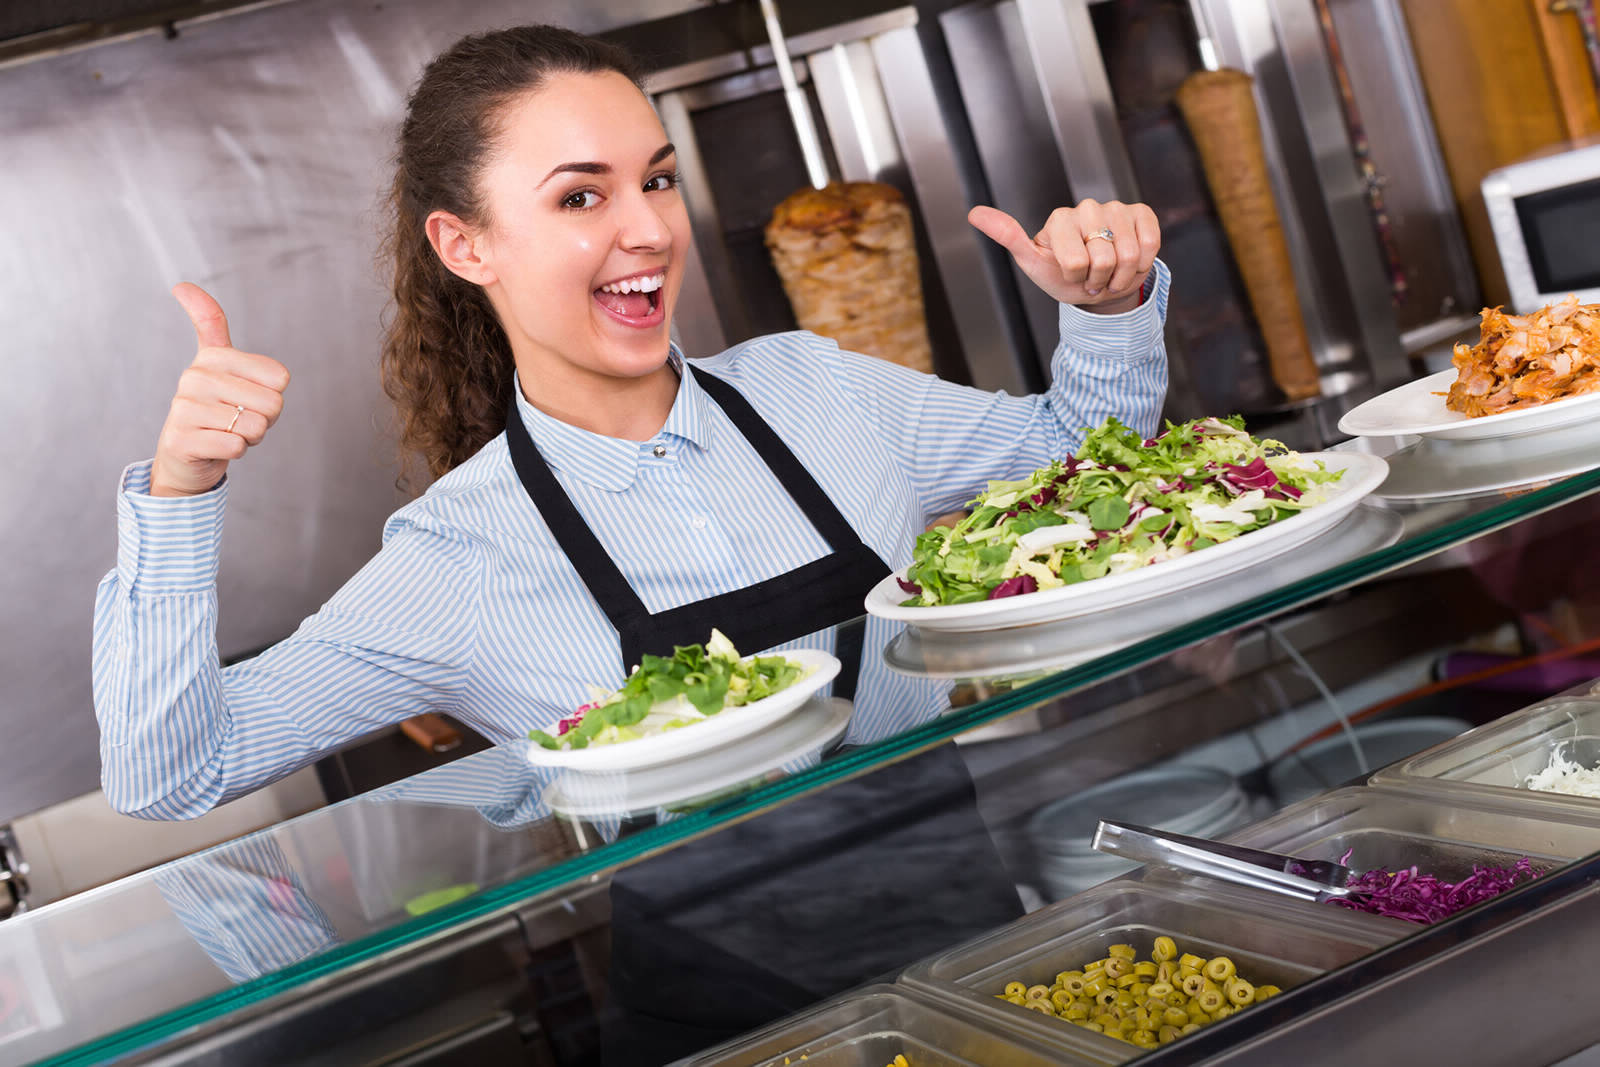 A restaurant server with her thumbs up behind the service line in the kitchen, with a Caesar Salad and another fresh salad on the counter.